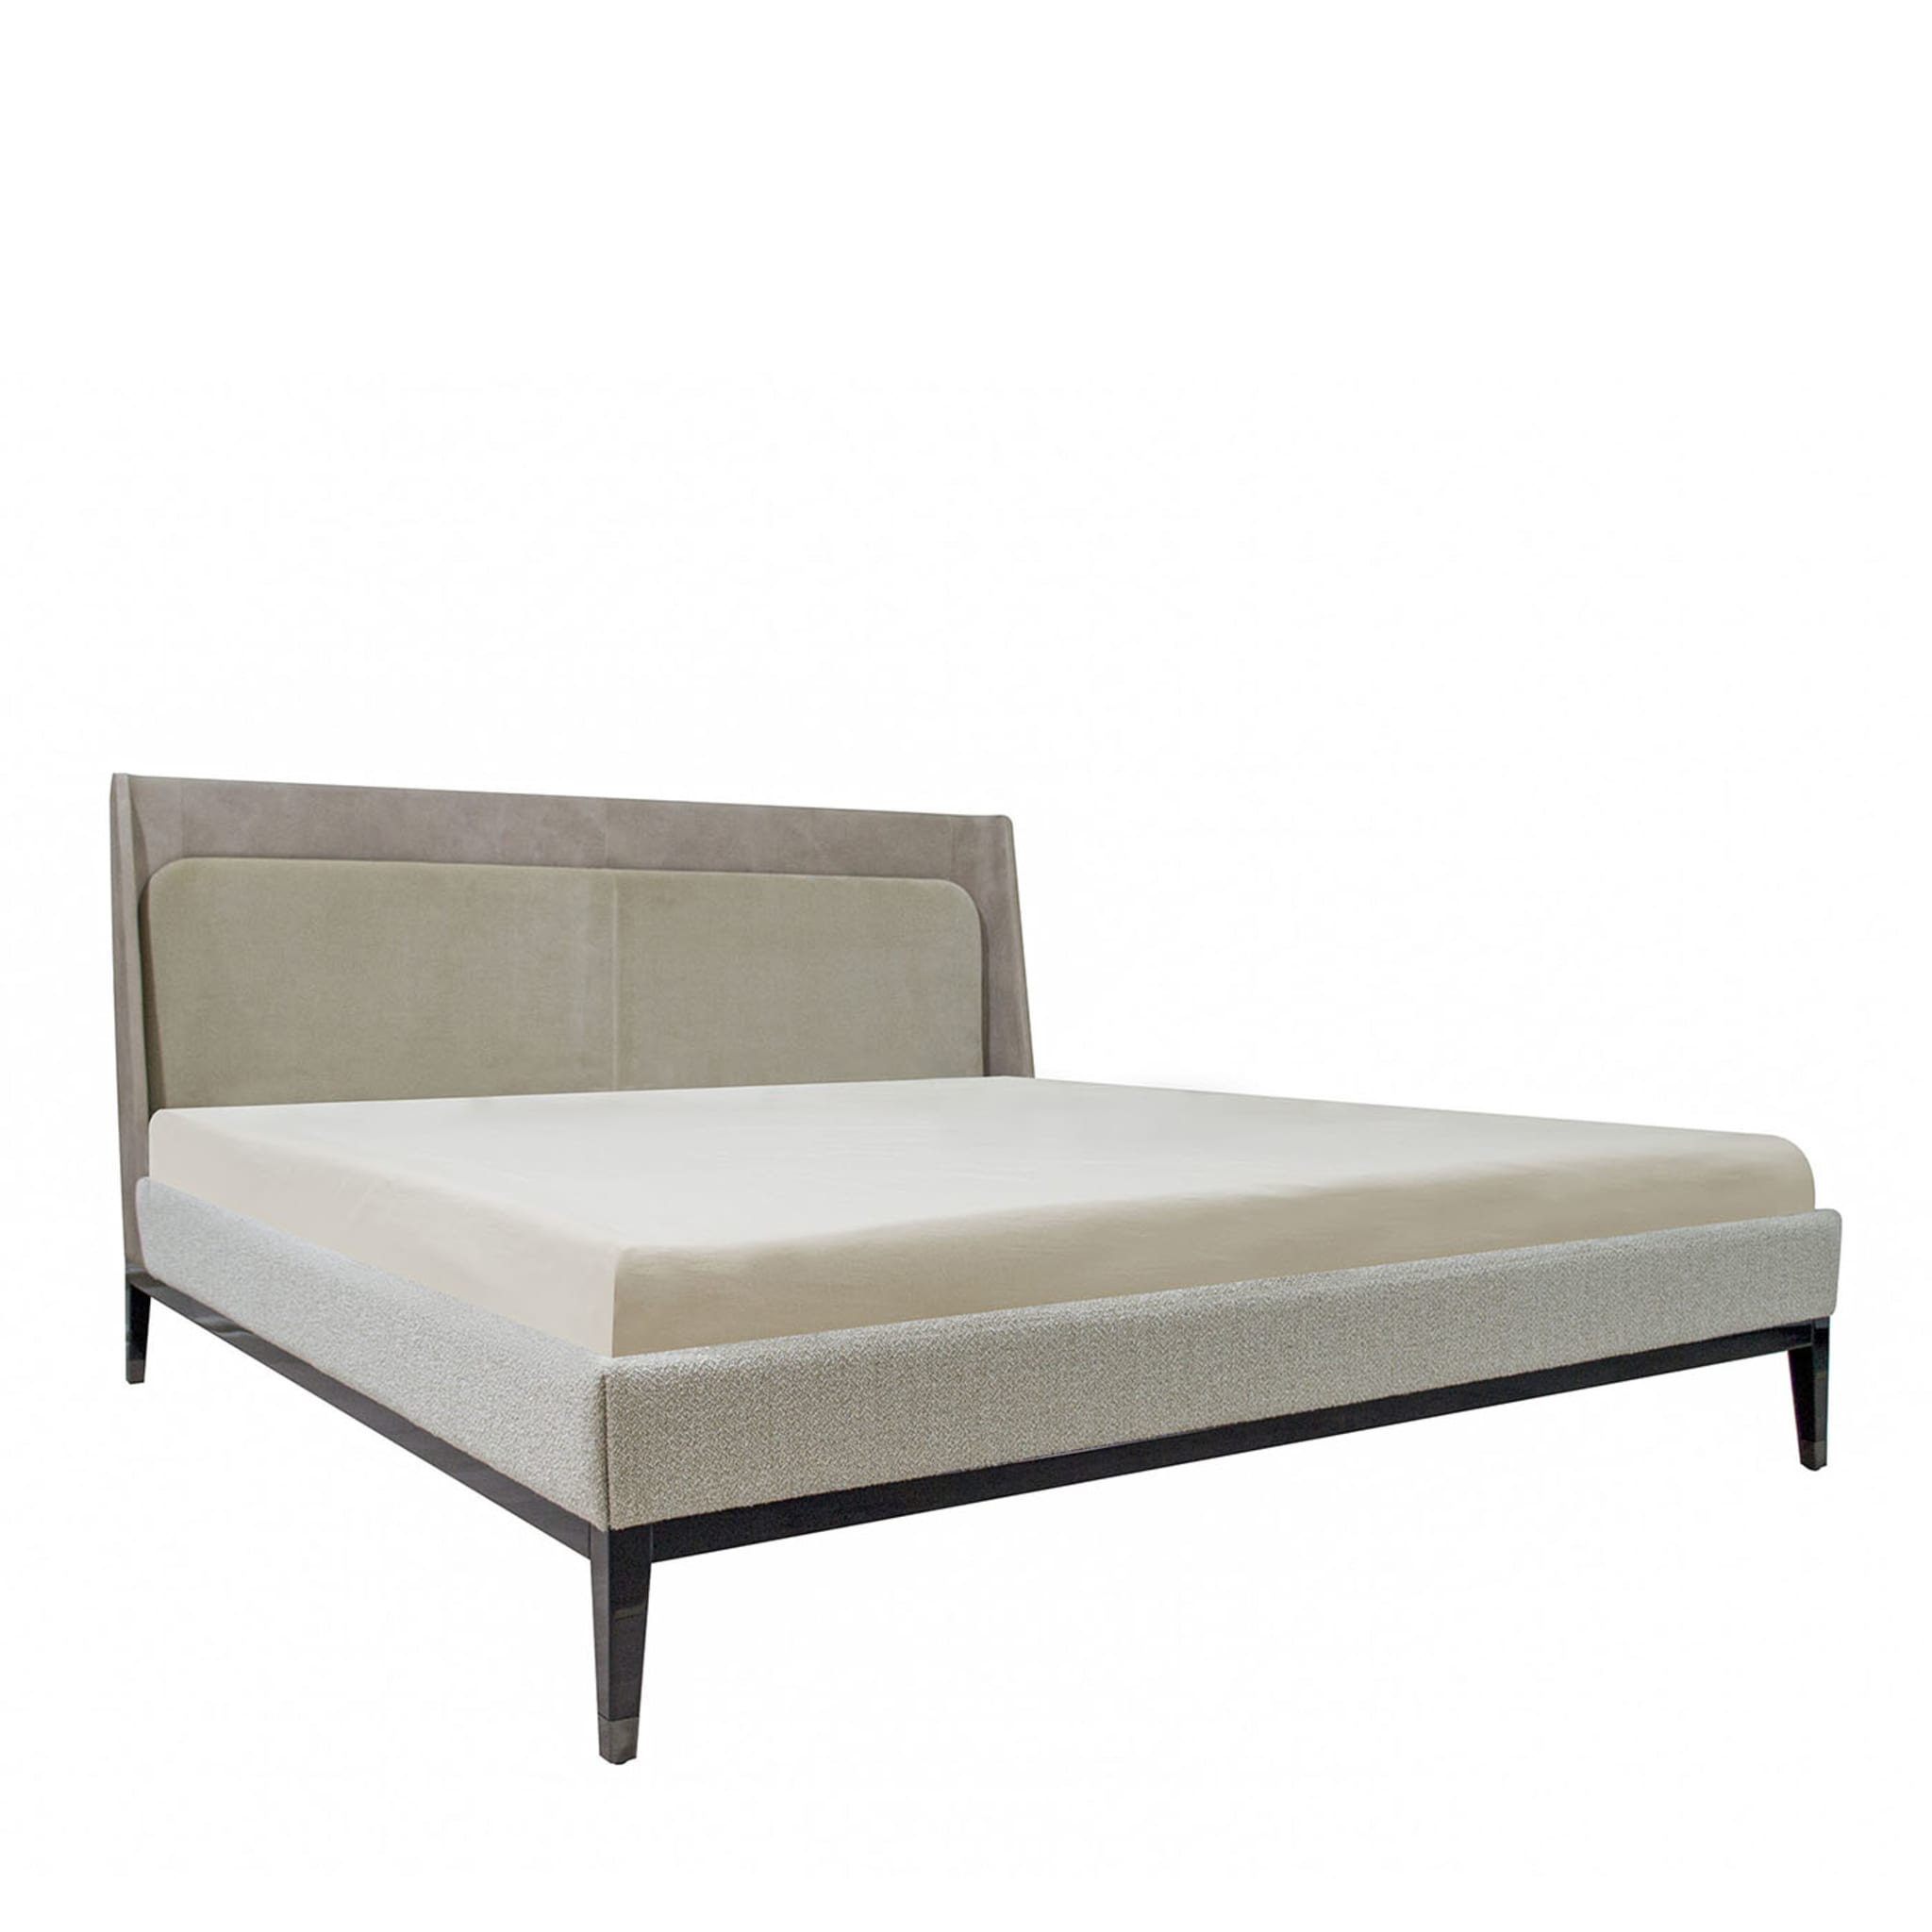 Italian Bed Upholstered in Nubuck and Quinoa Boucle Fabric  - Main view